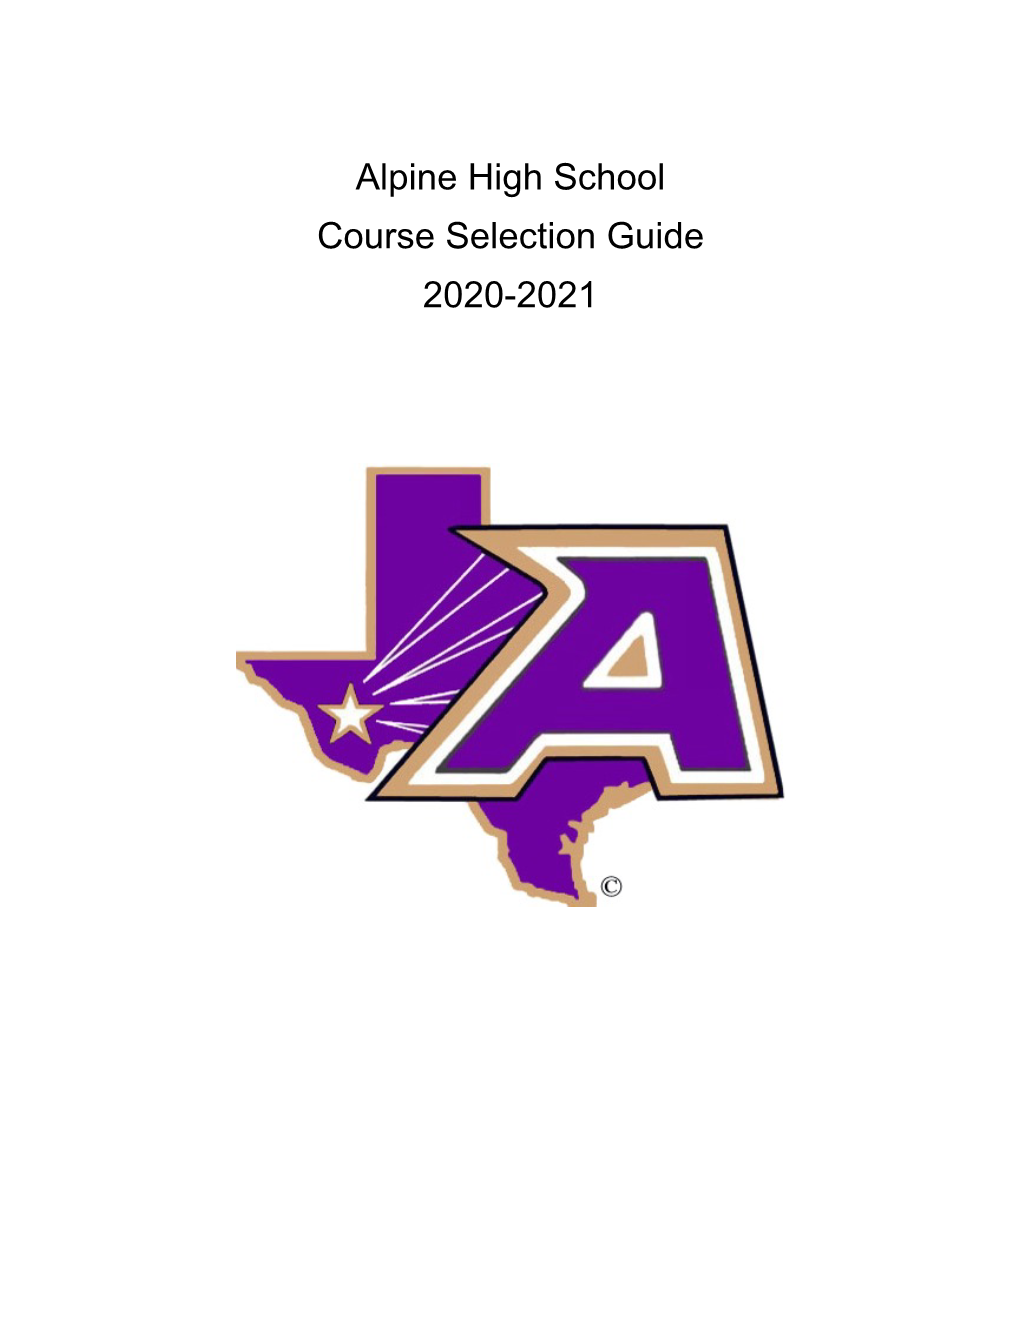 Alpine High School Course Selection Guide 2020-2021 Welcome Students and Parents